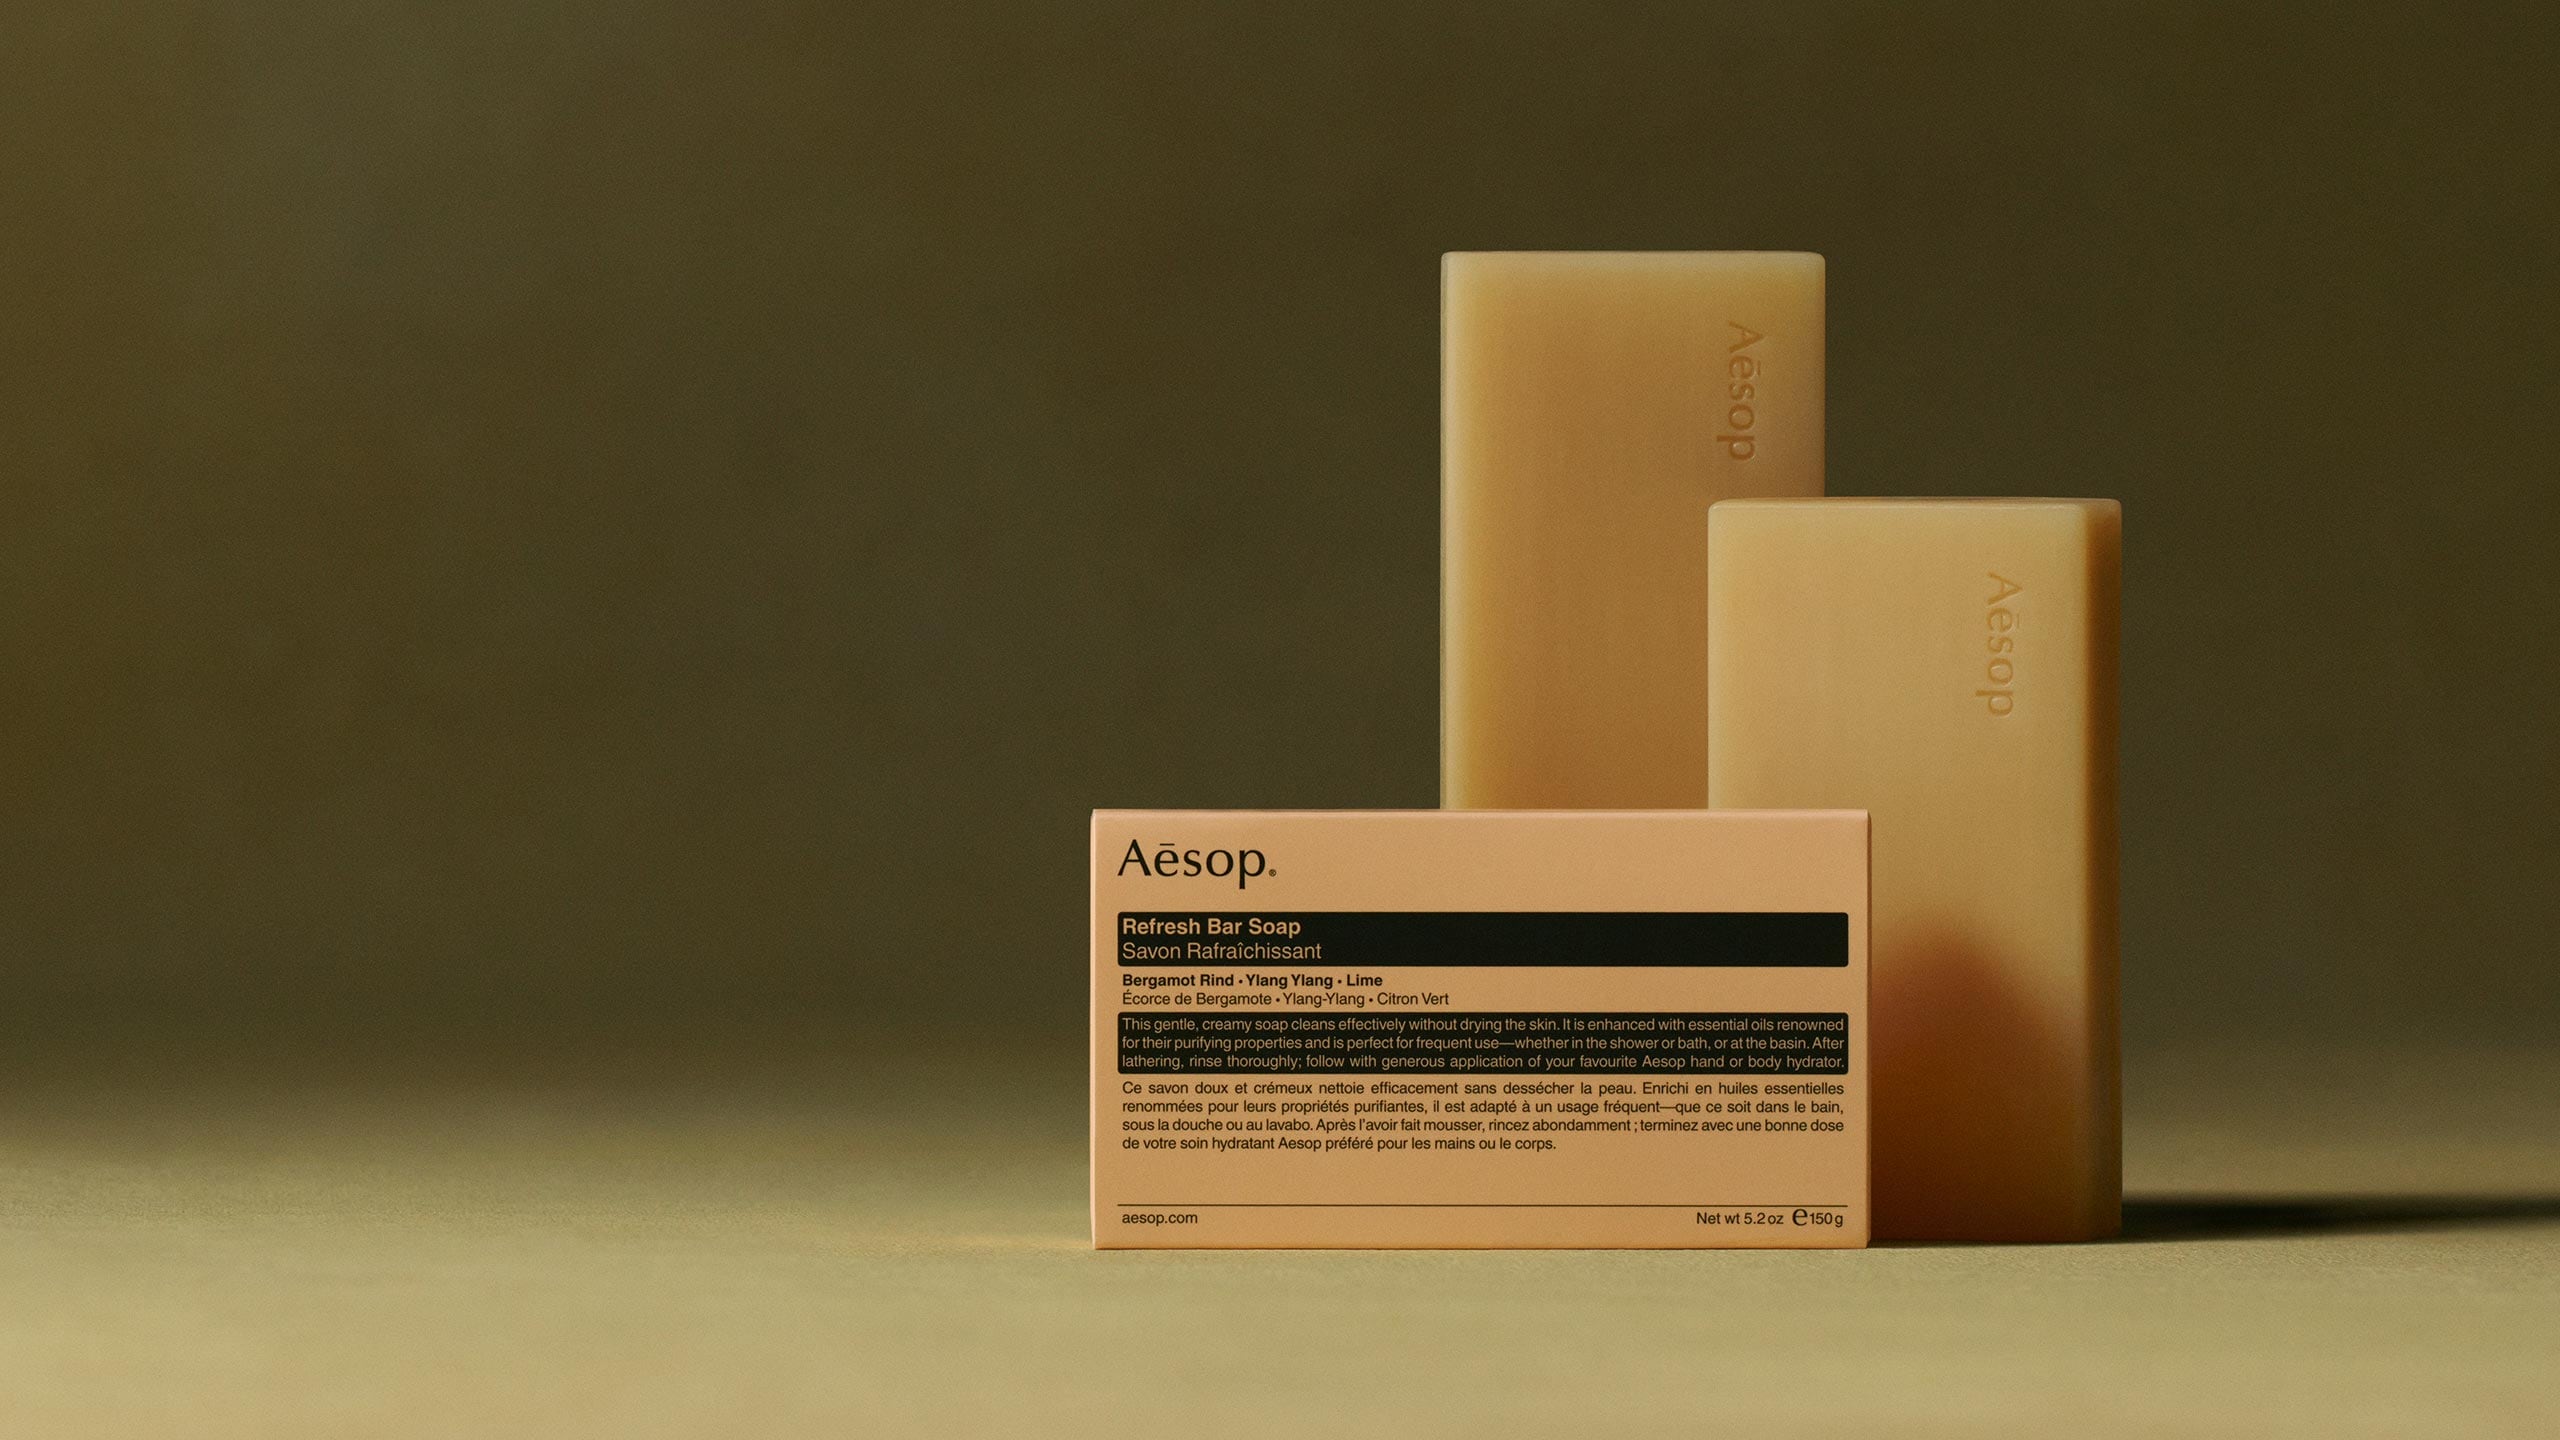 Aesop Refresh bar soaps placed horizontally behind the packaging in textured dark green background